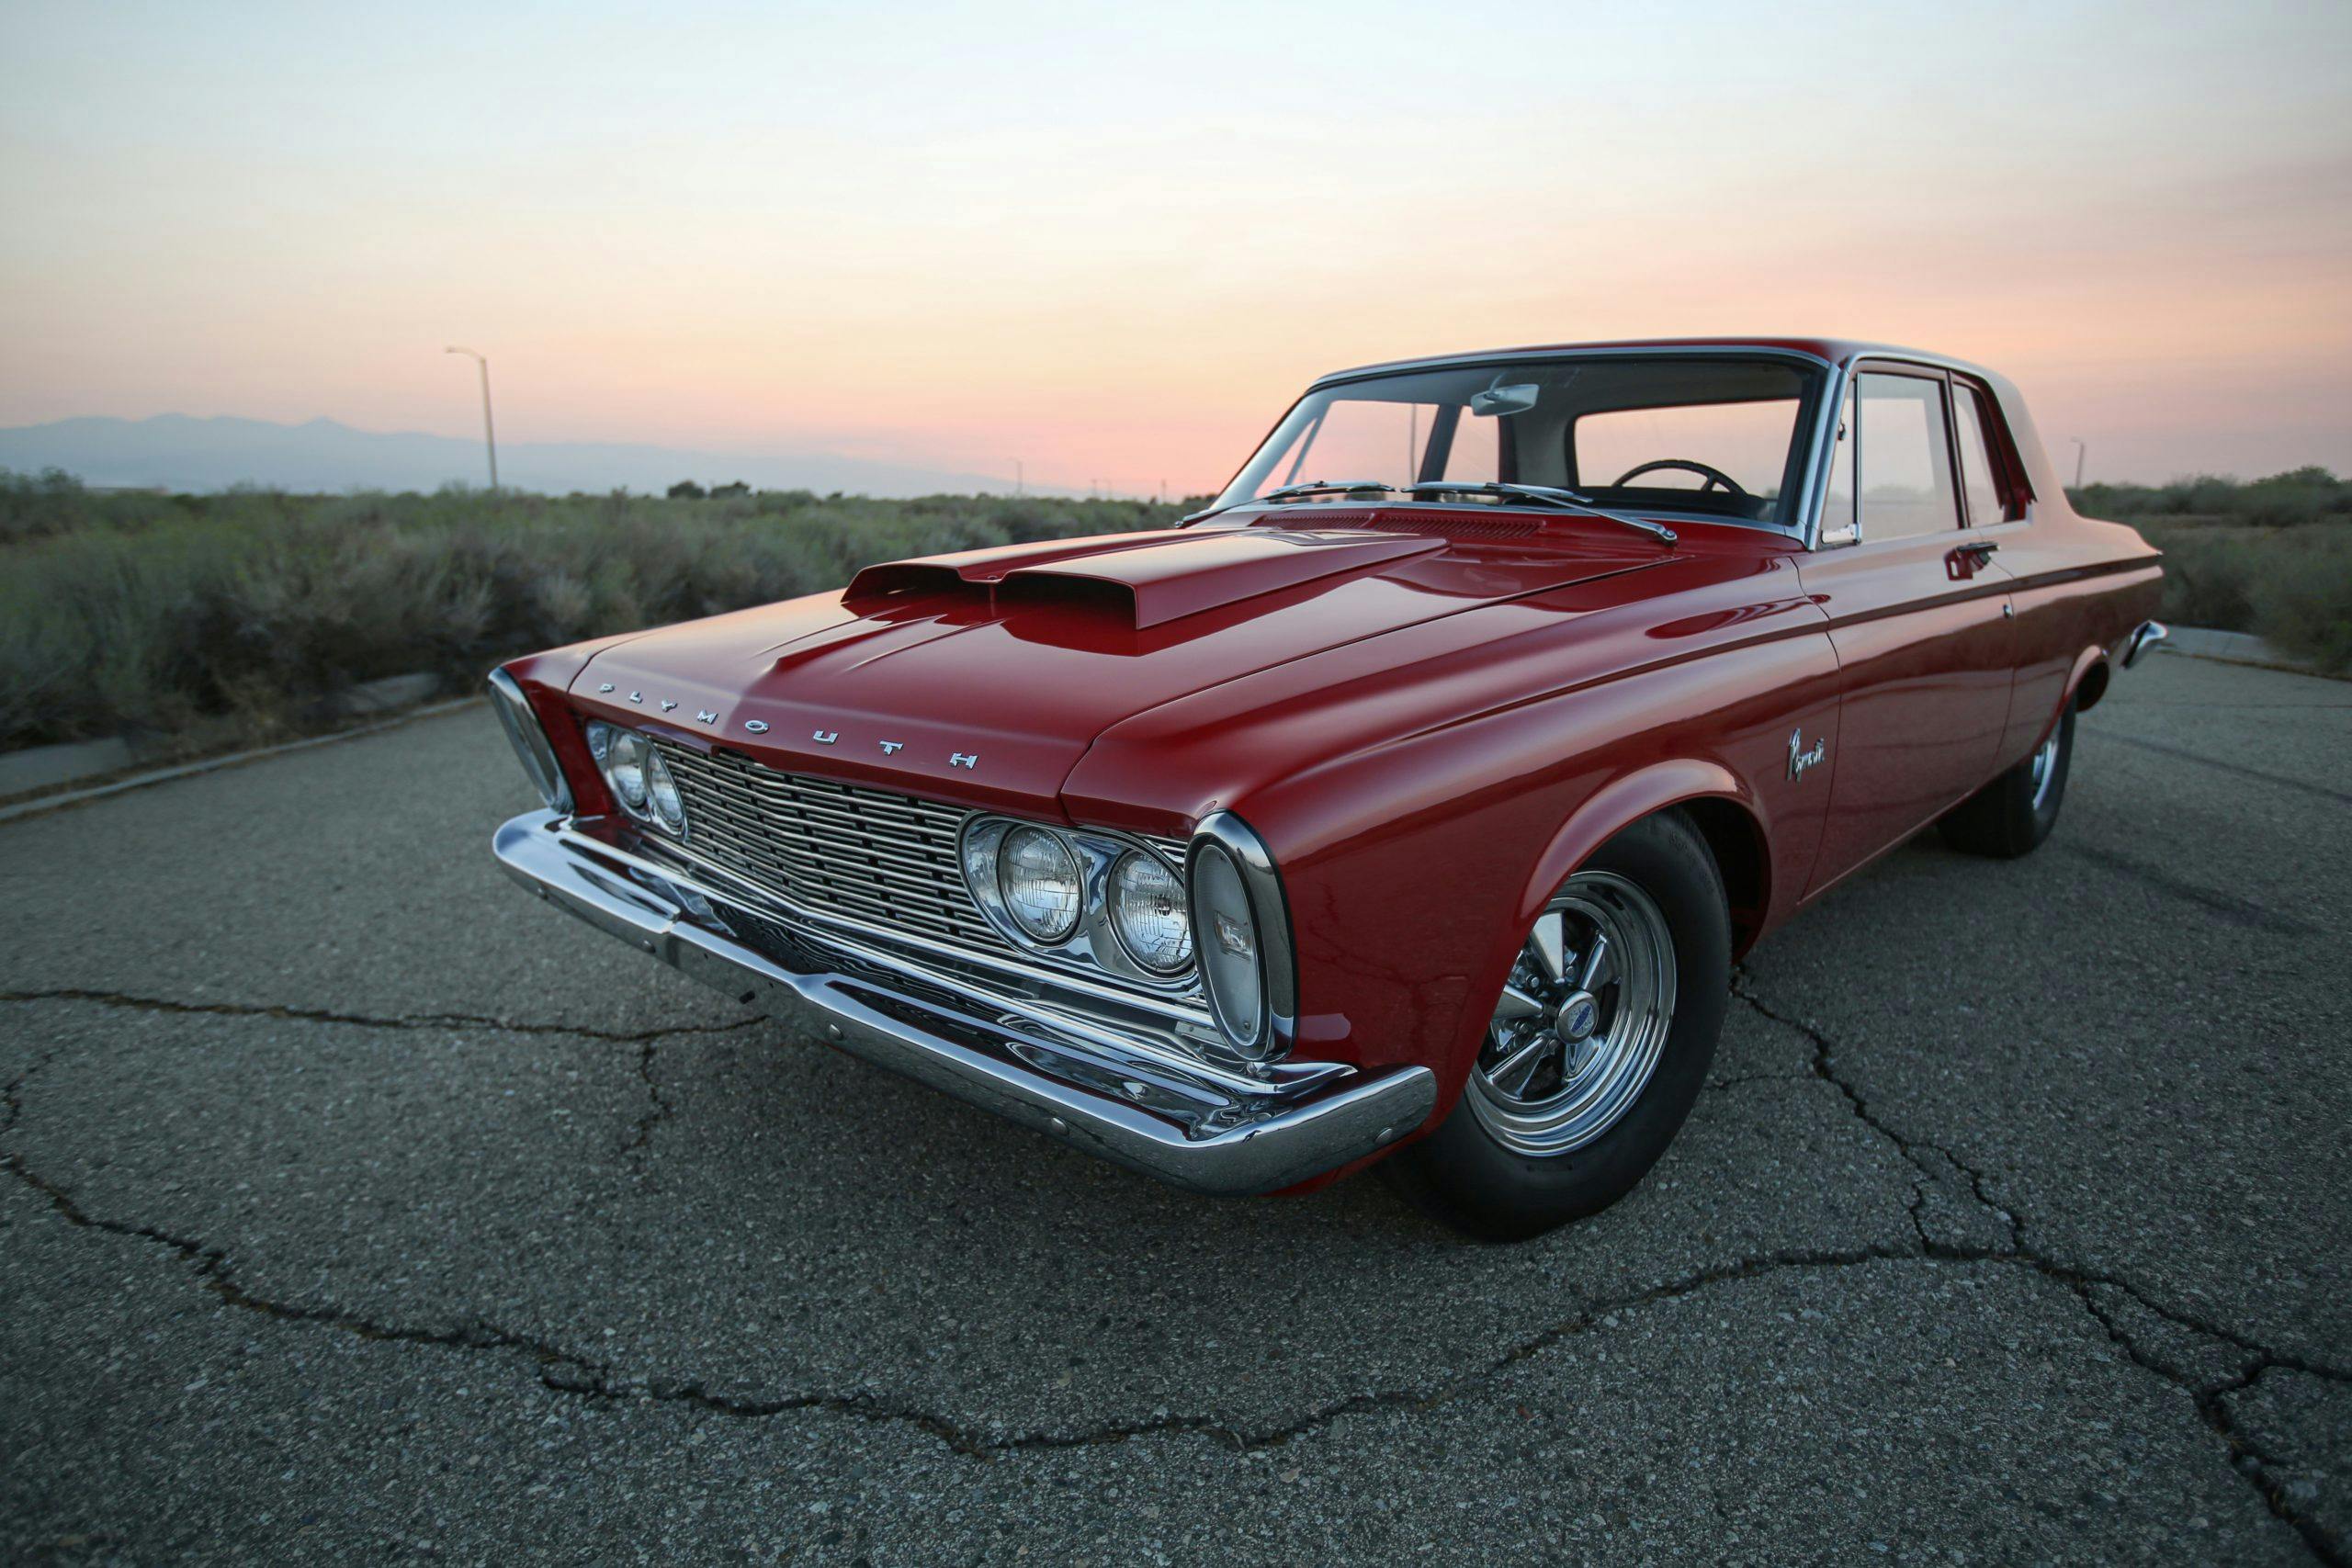 1963 Plymouth 426 Max Wedge lightweight front three-quarter close